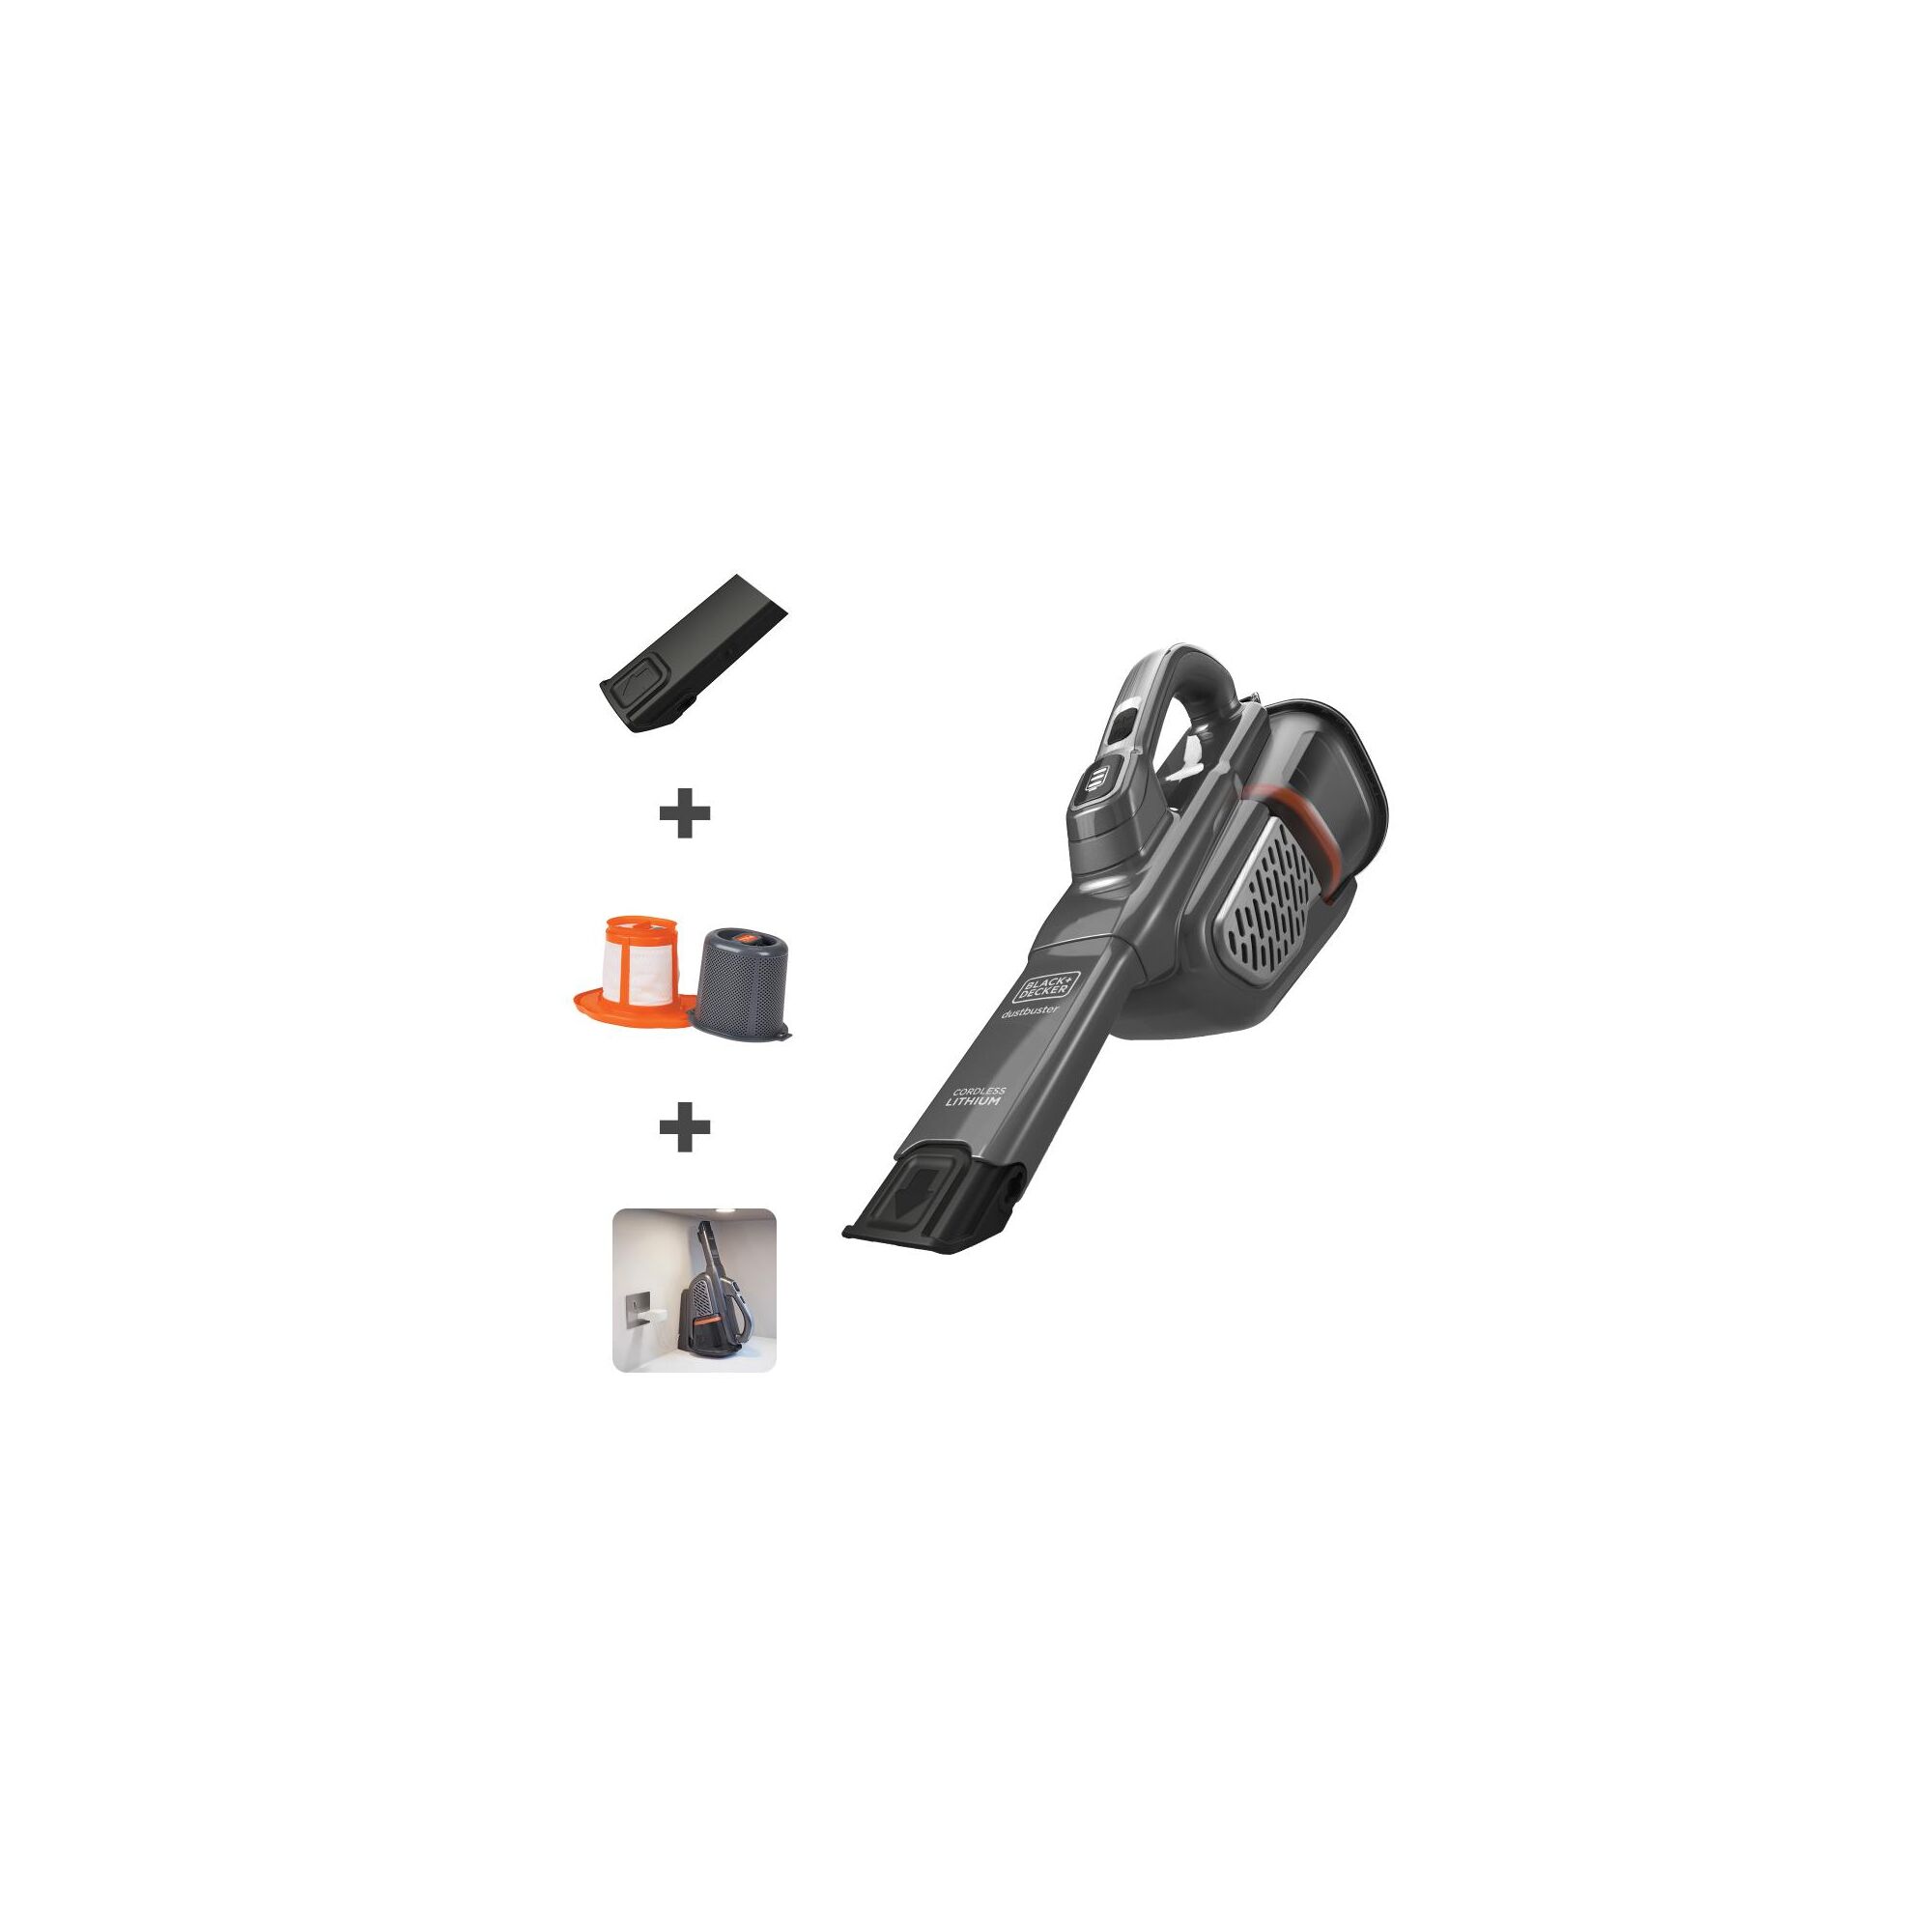 Kit components of the BLACK+DECKER dustbuster